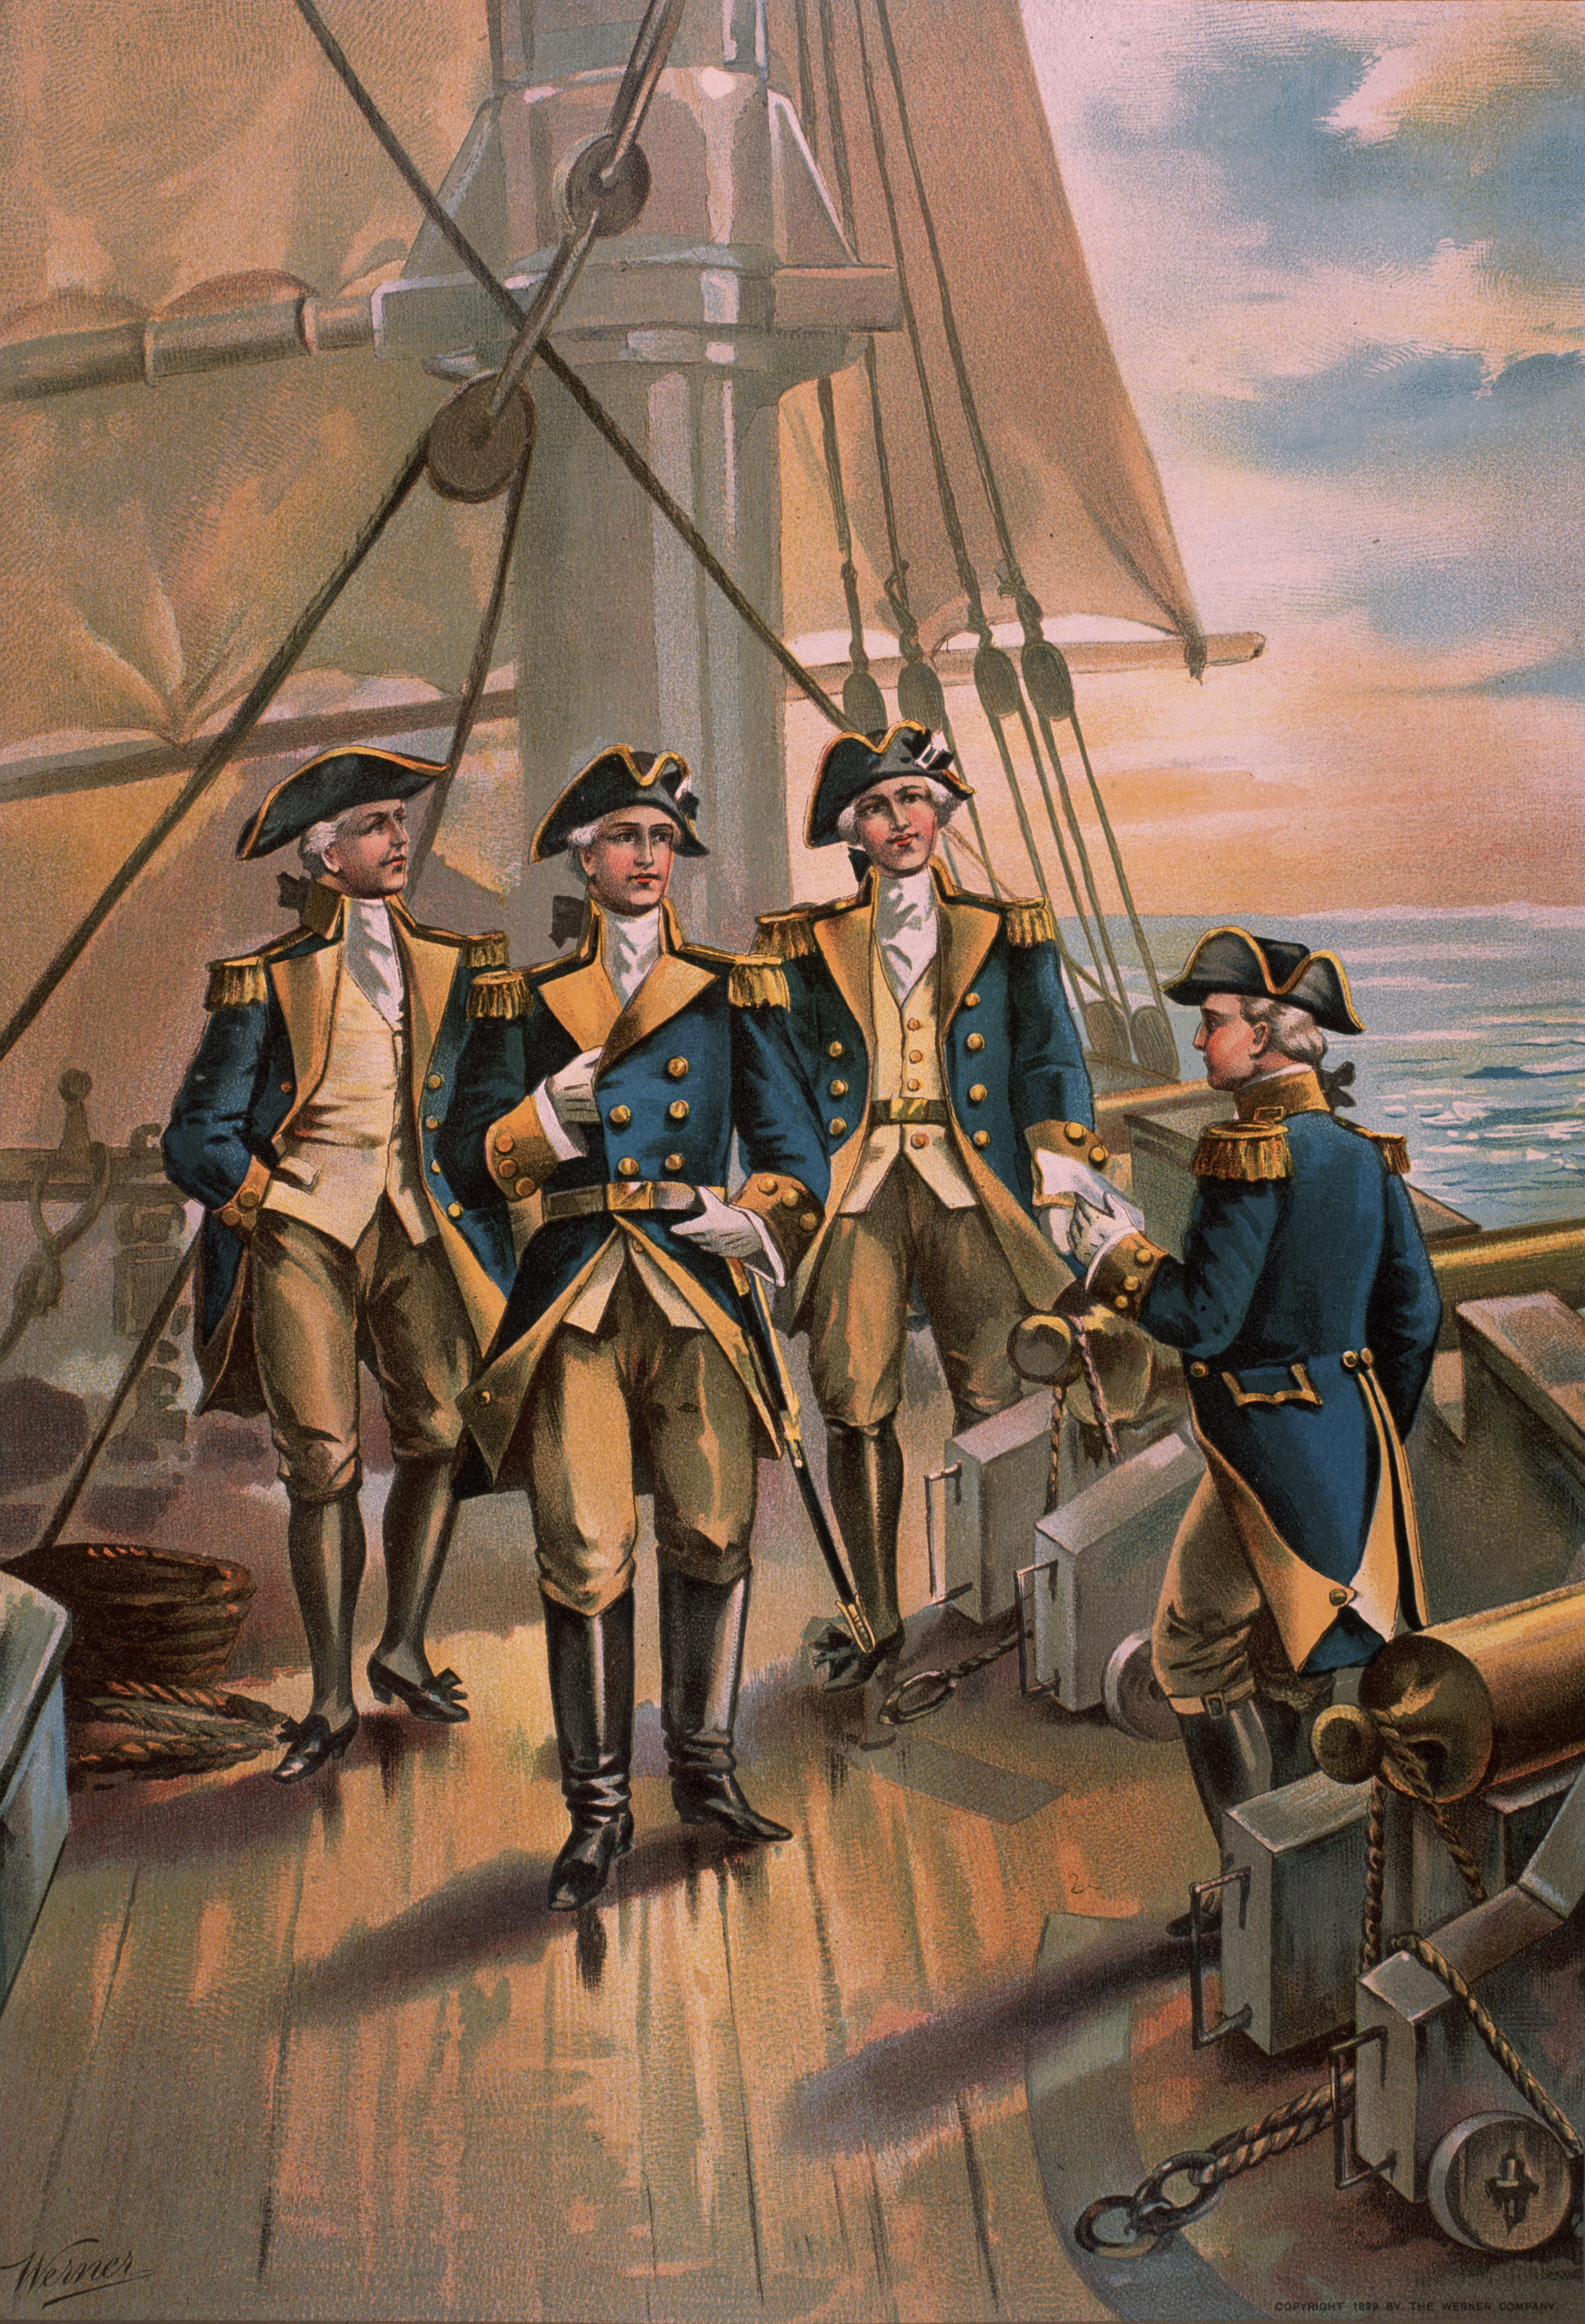 A color illustration published in 1899 depicts the commander in chief of the Continental Navy in 1776, Commodore Esek Hopkins with his officers on deck of his ship the USS 'Cabot.' Hopkins dismissed from the Navy in 1778. (Photo by Stock Montage/Stock Montage/Getty Images)